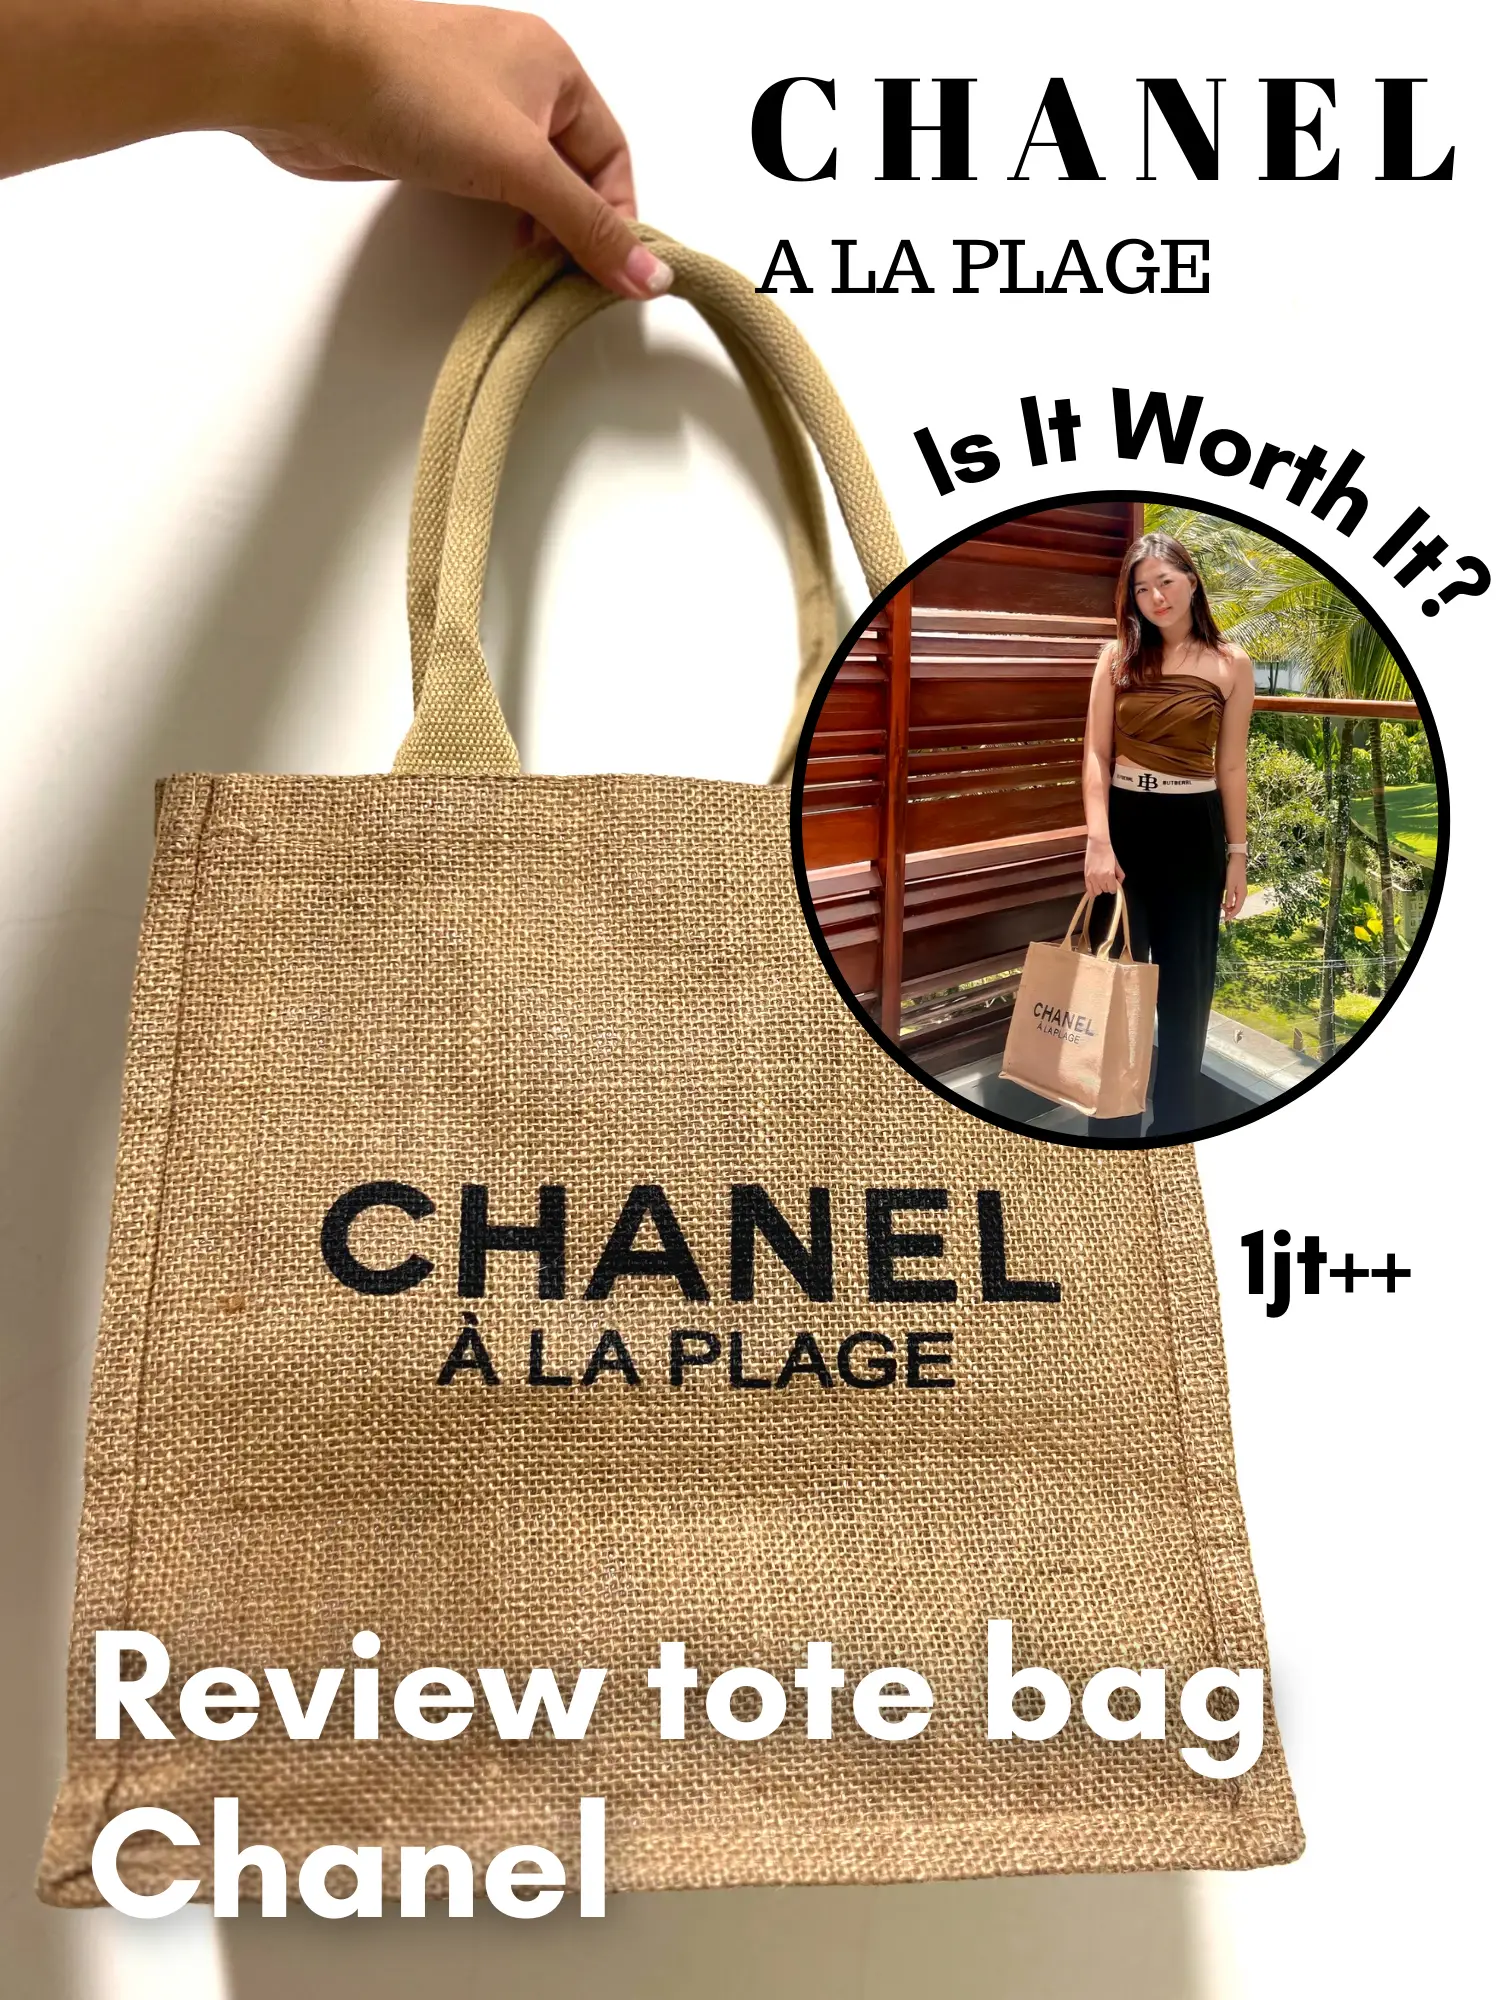 REVIEW TOTE BAG CHANEL SEJUTAAN 😱😱, Gallery posted by Grace Sabartina